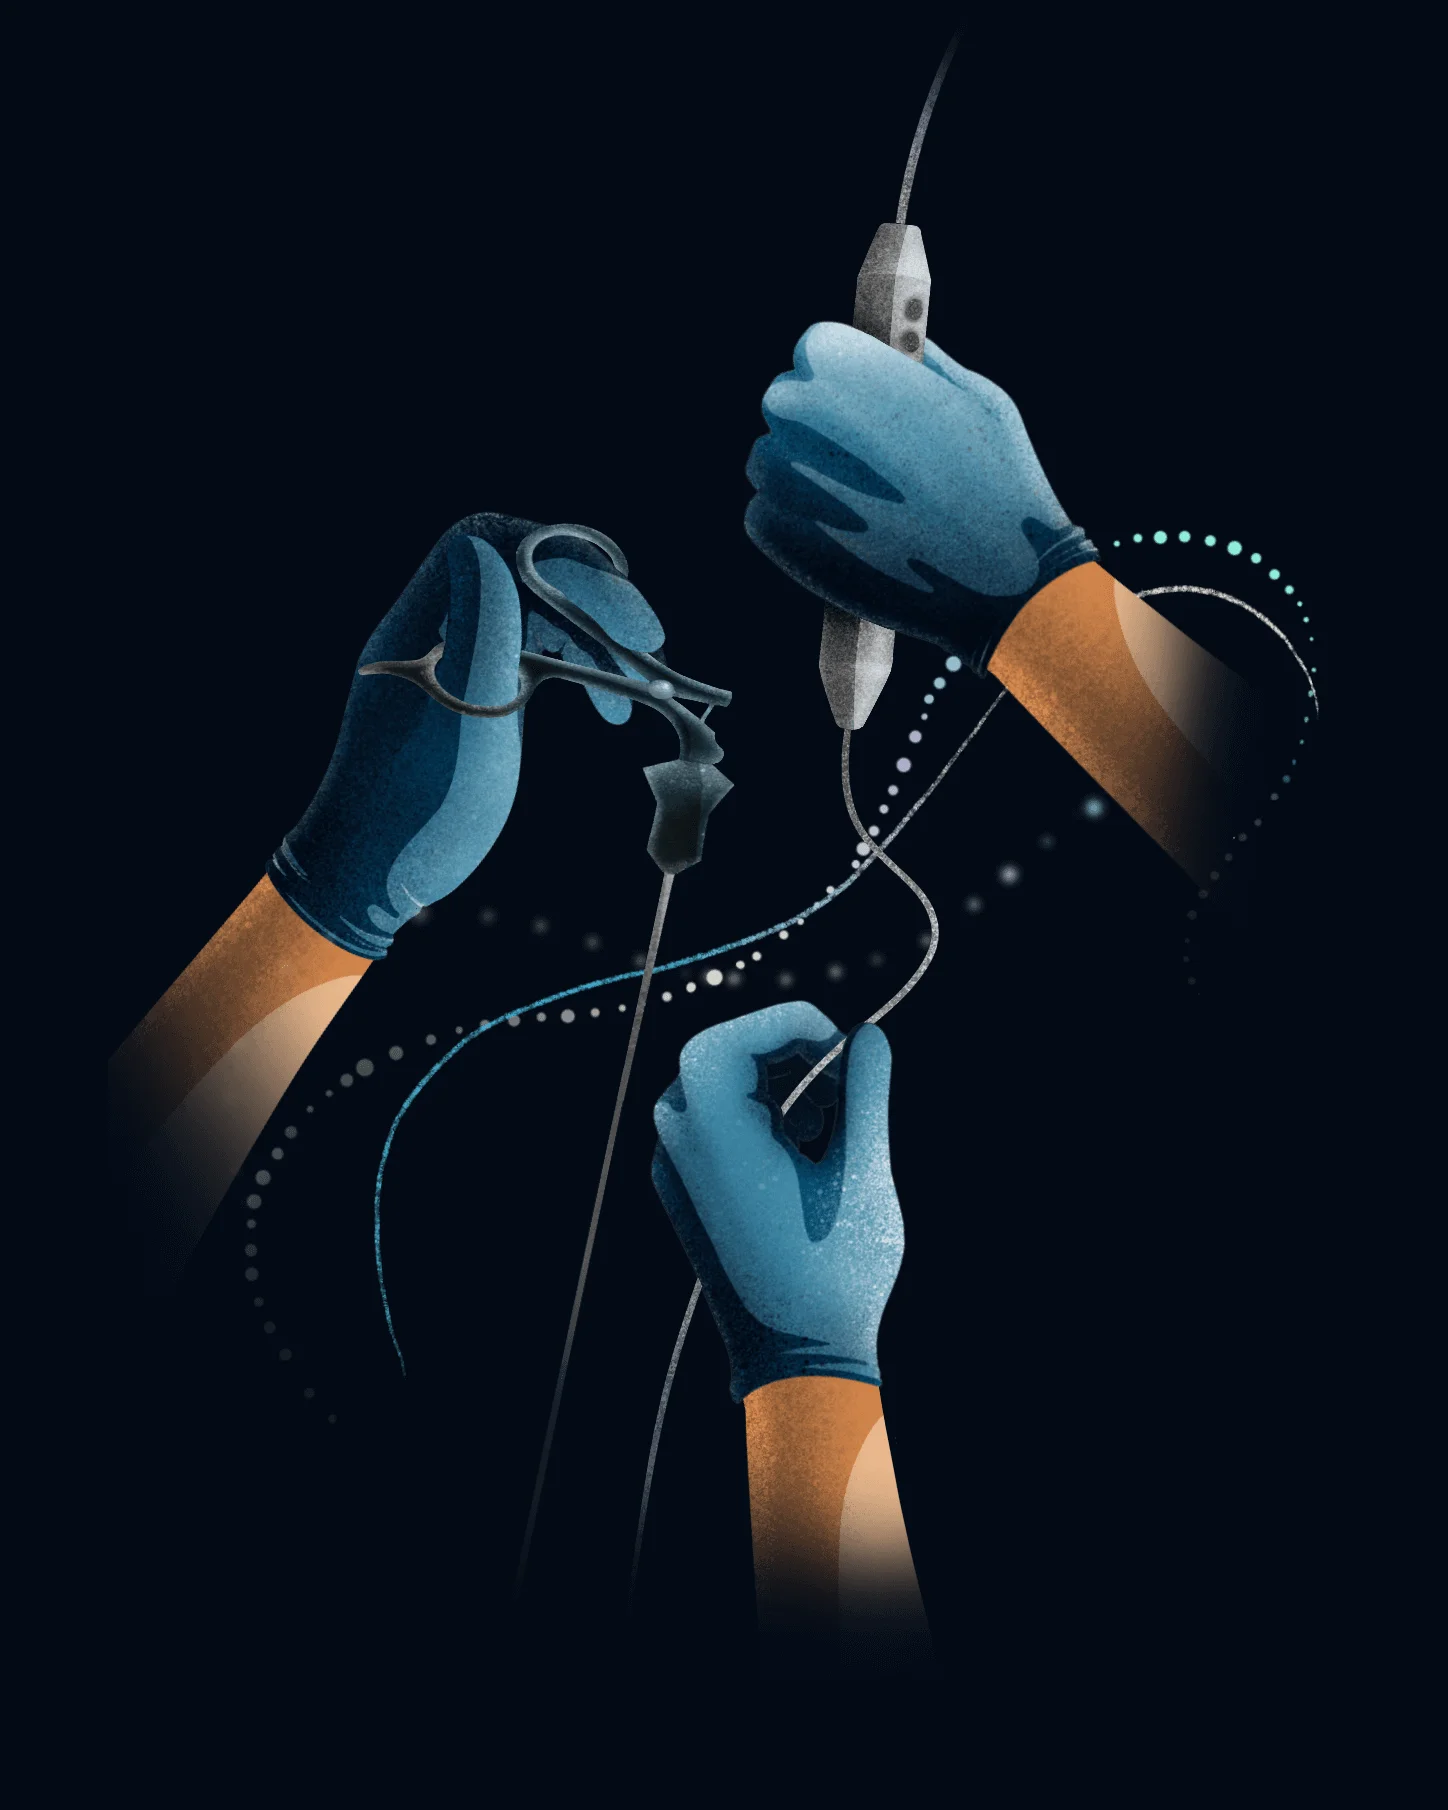 Three gloved hands each holding a medical tool on a navy background.